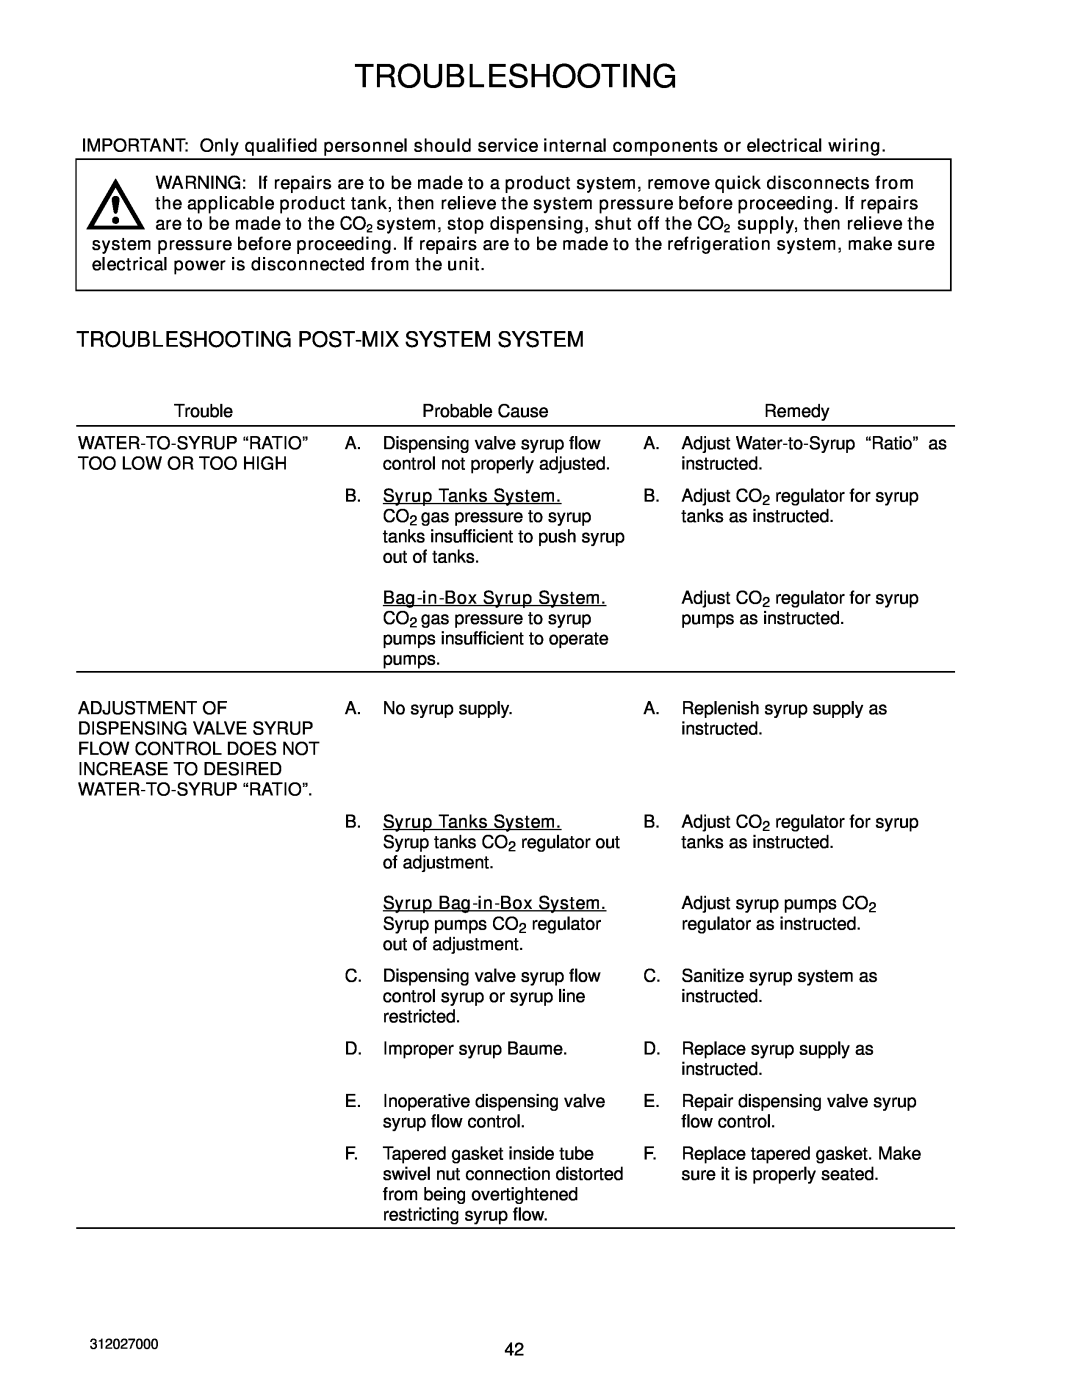 Cornelius R-134A service manual Troubleshooting Post-Mix System System 